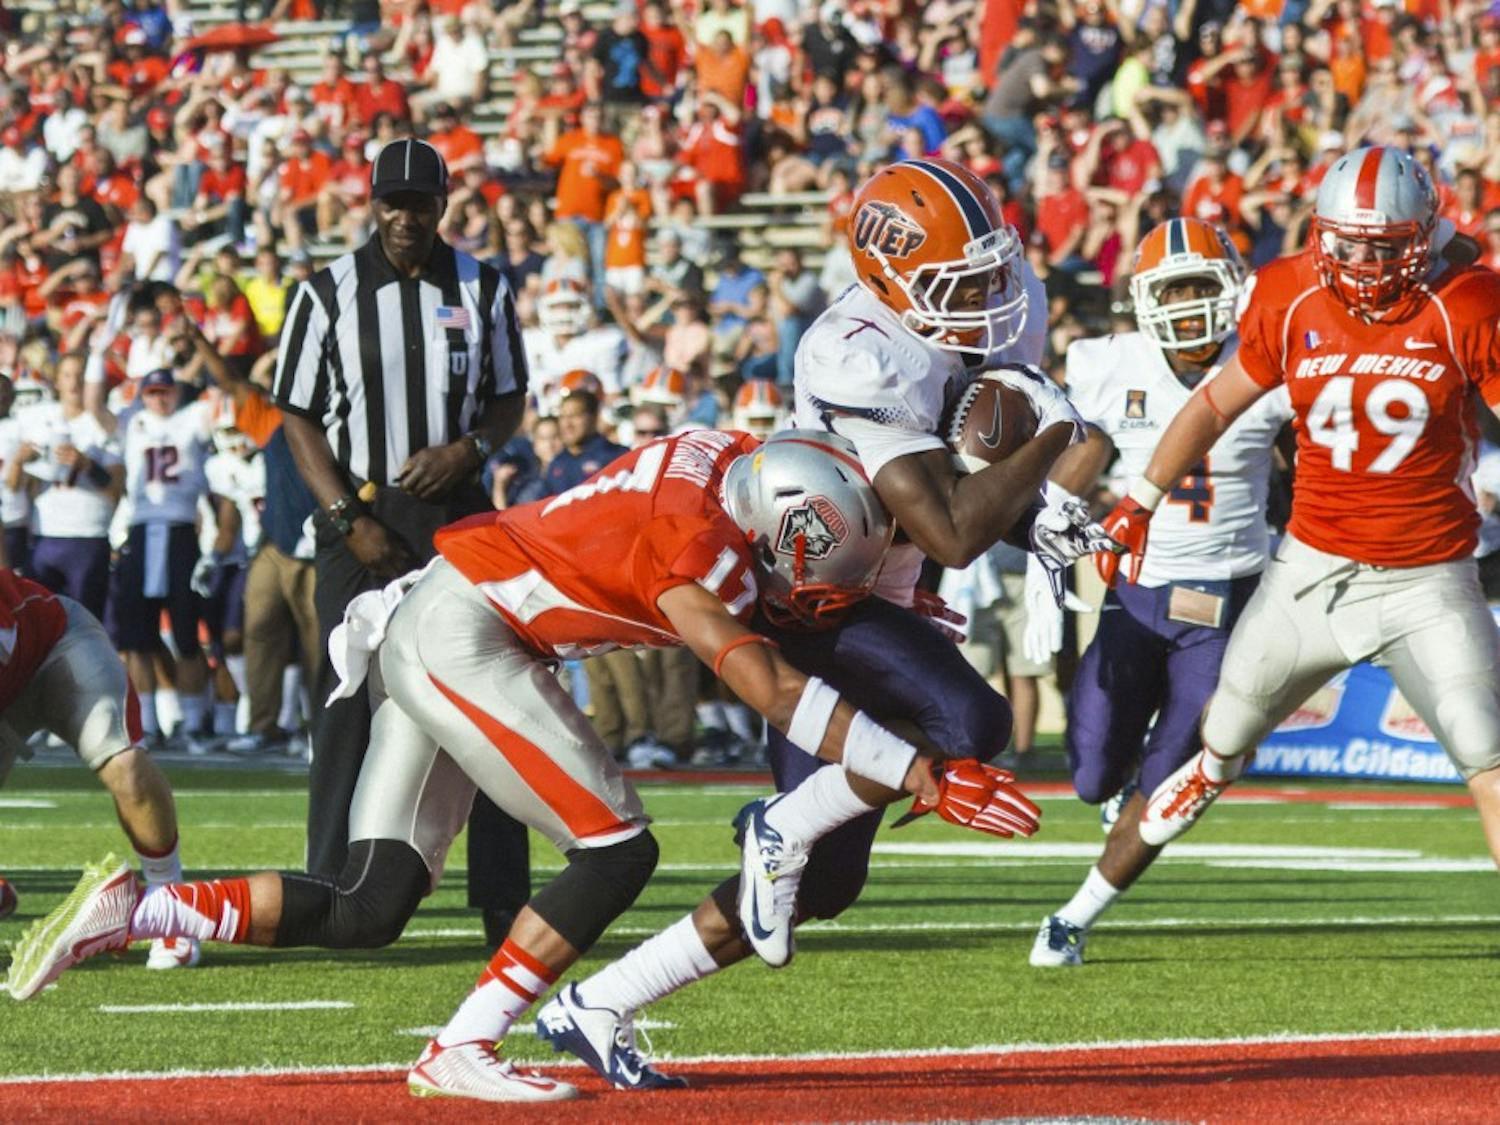 UTEP's Aaron Jones #29 runs in the first touchdown as he gets past the New Mexico defense. The Lobos faced the UTEP Miners for the first game of the season Saturday evening at University Stadium. UTEP defeated New Mexico 31-24.